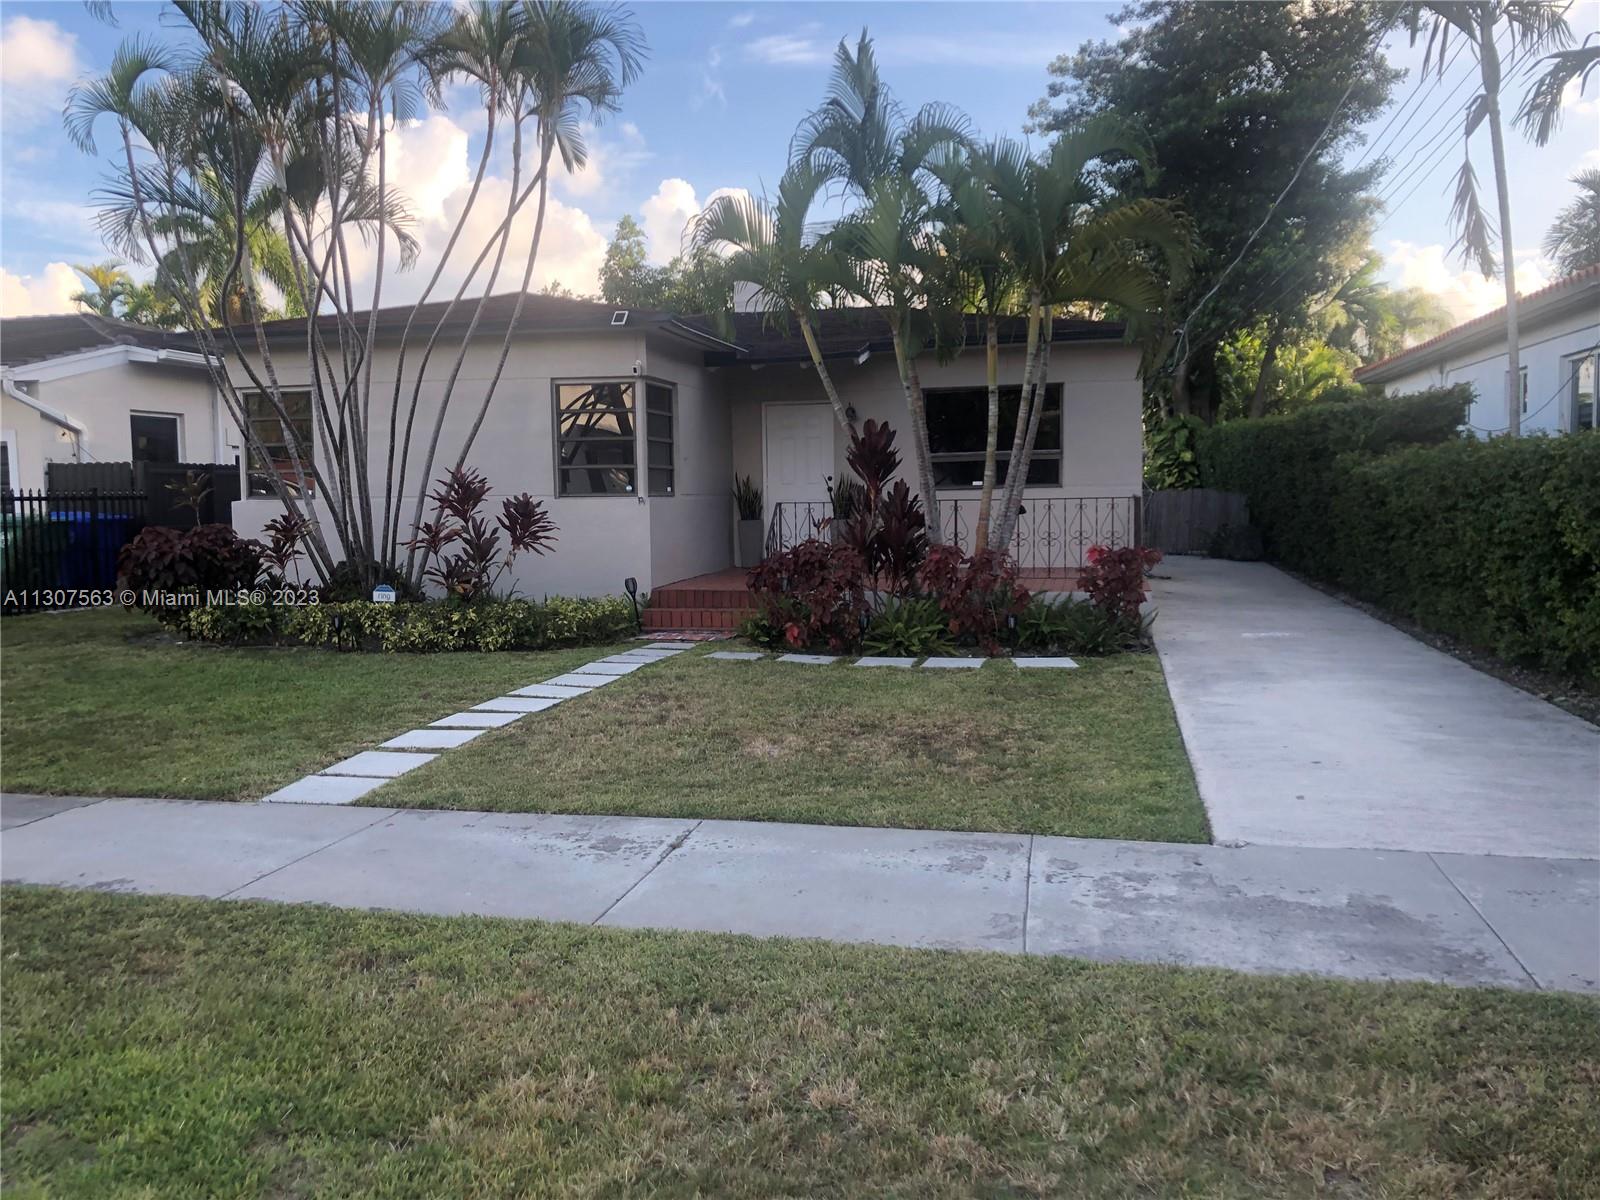 Photo 1 of   in Miami - MLS A11307563